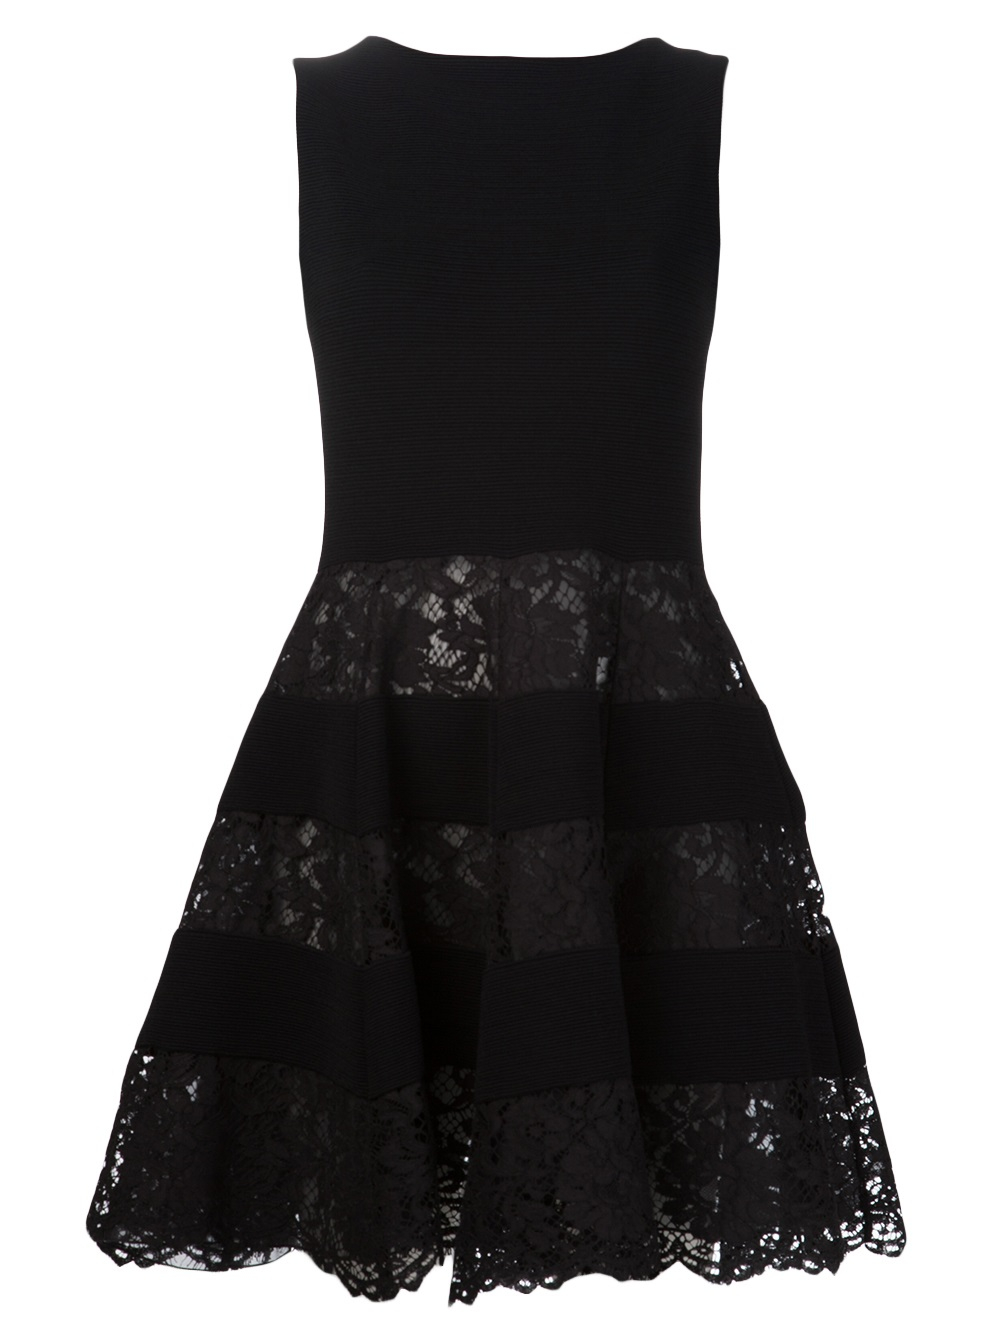 Lyst - Valentino Ribbed Lace Skirt Dress in Black